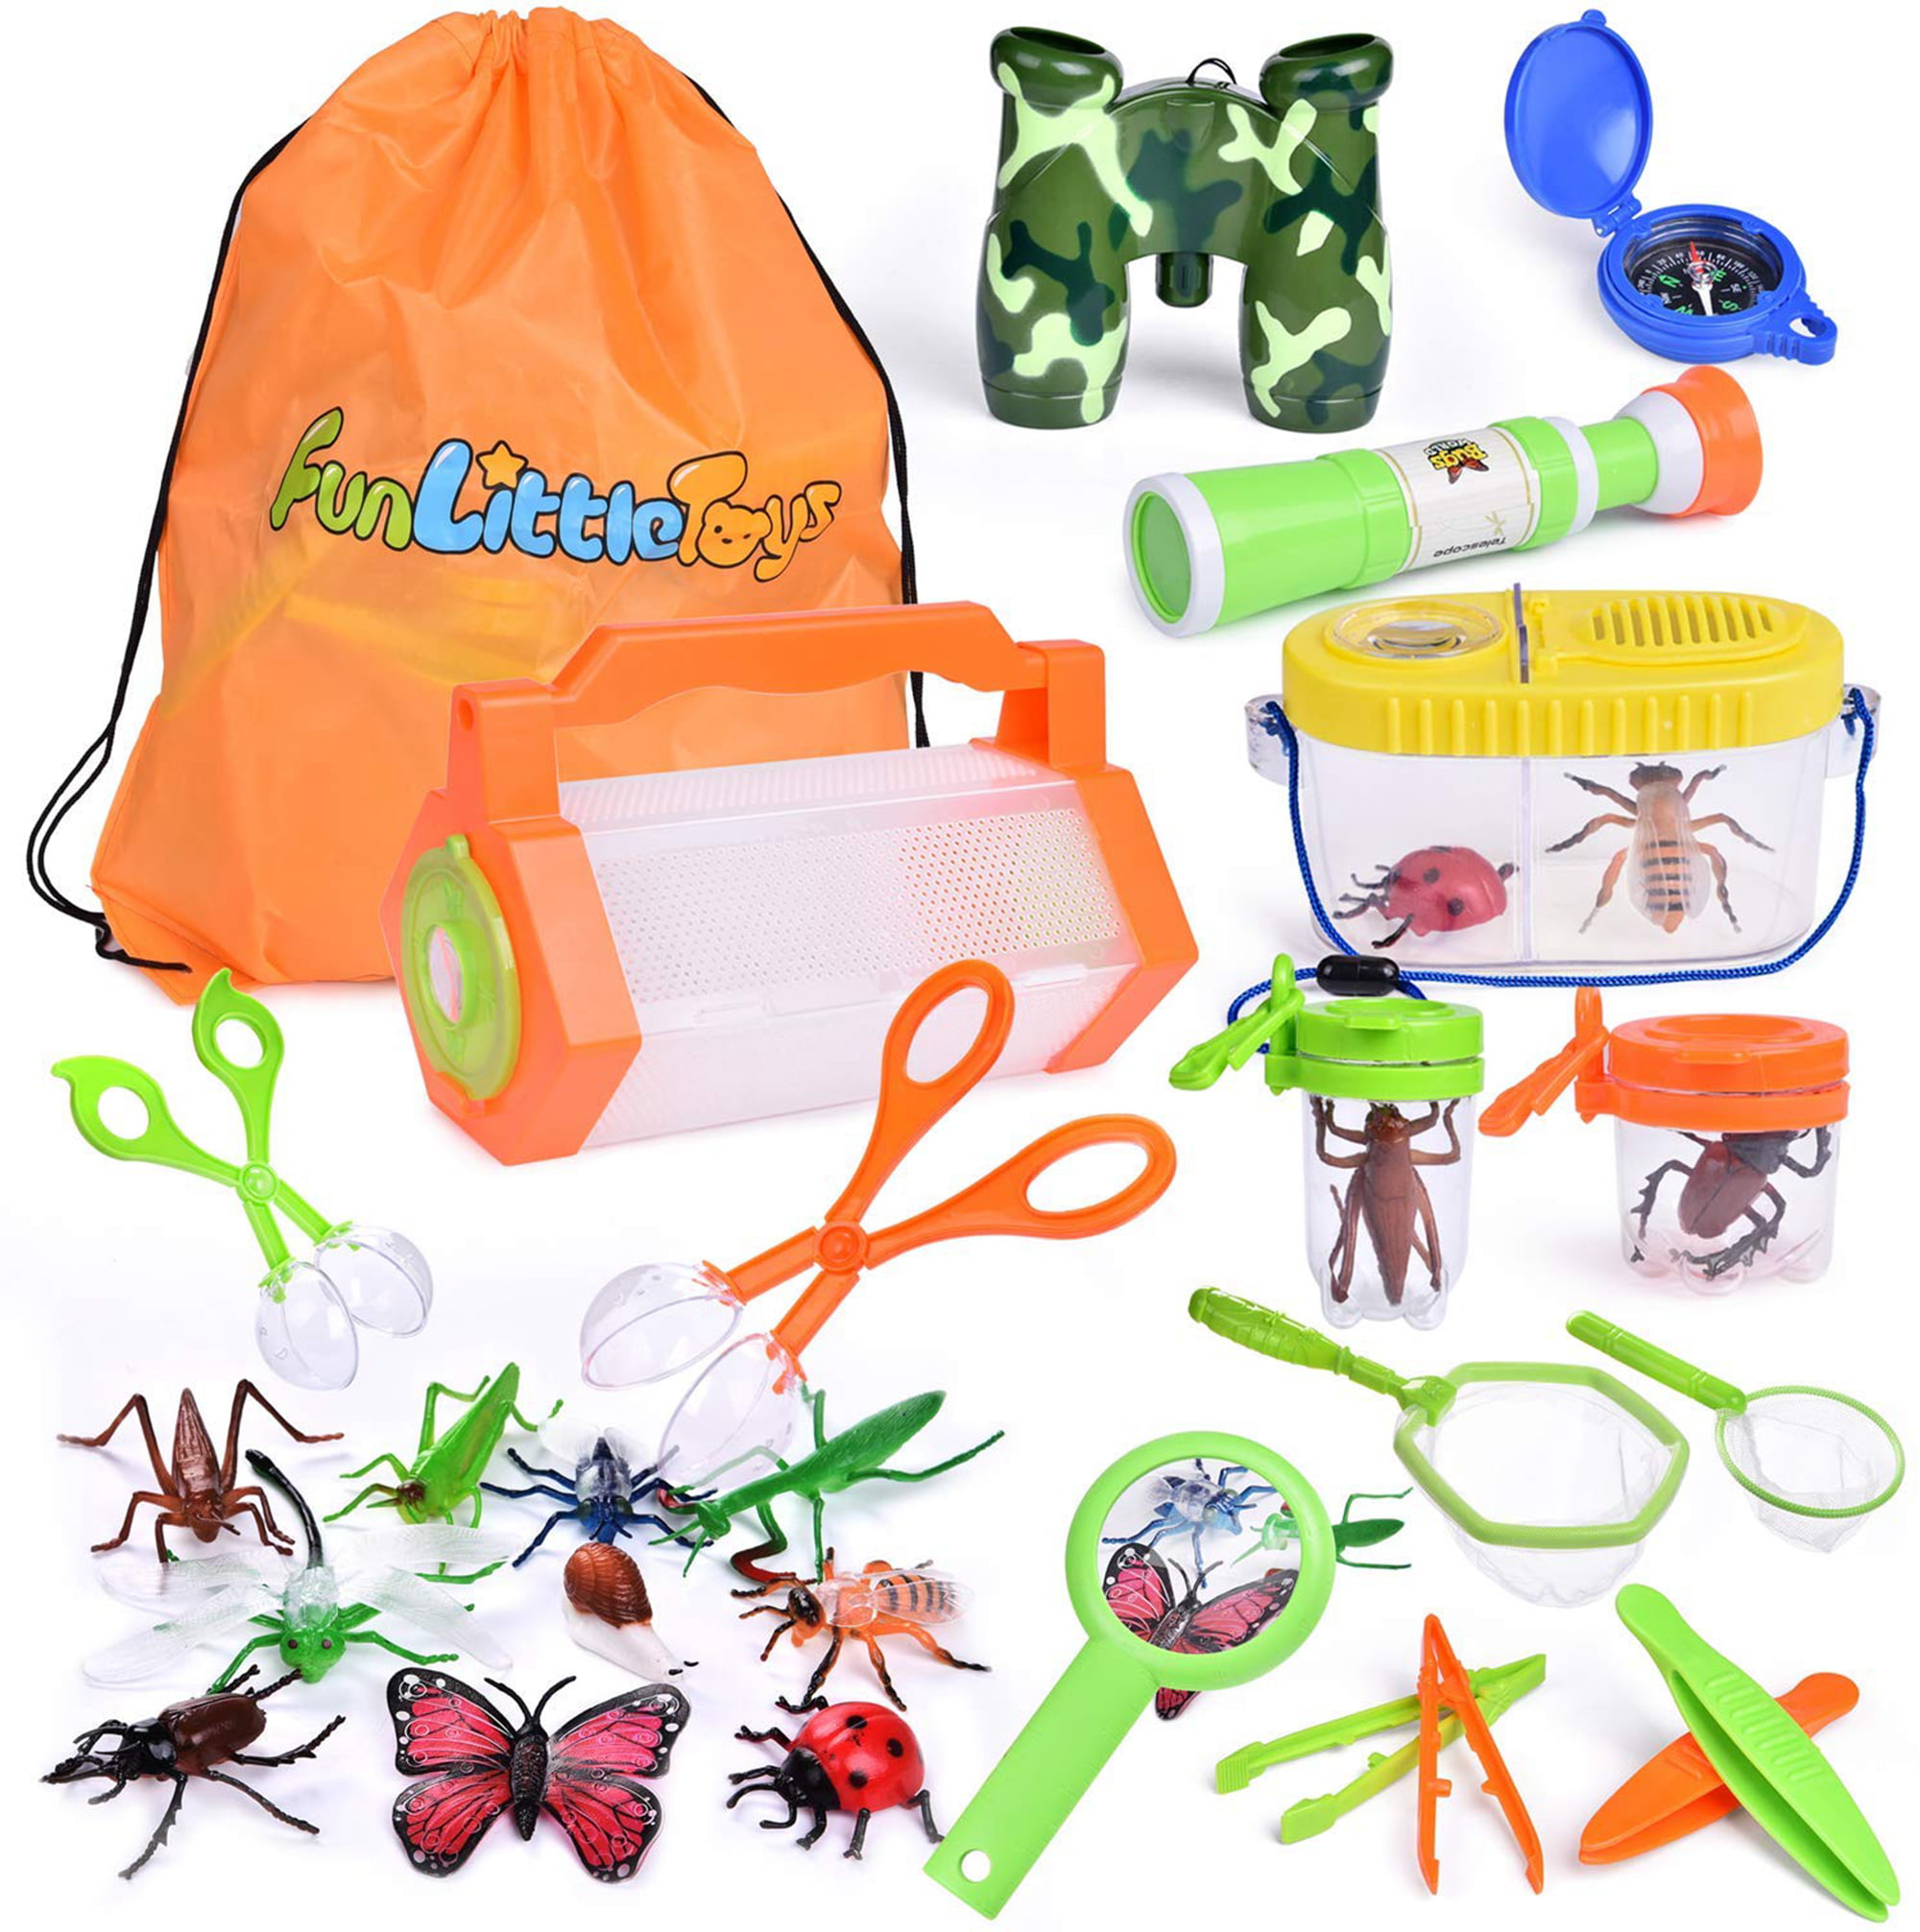 New Outdoor Bug Insect Catcher Kit Kids Child Catching ~ Picked at Random Qty 1 